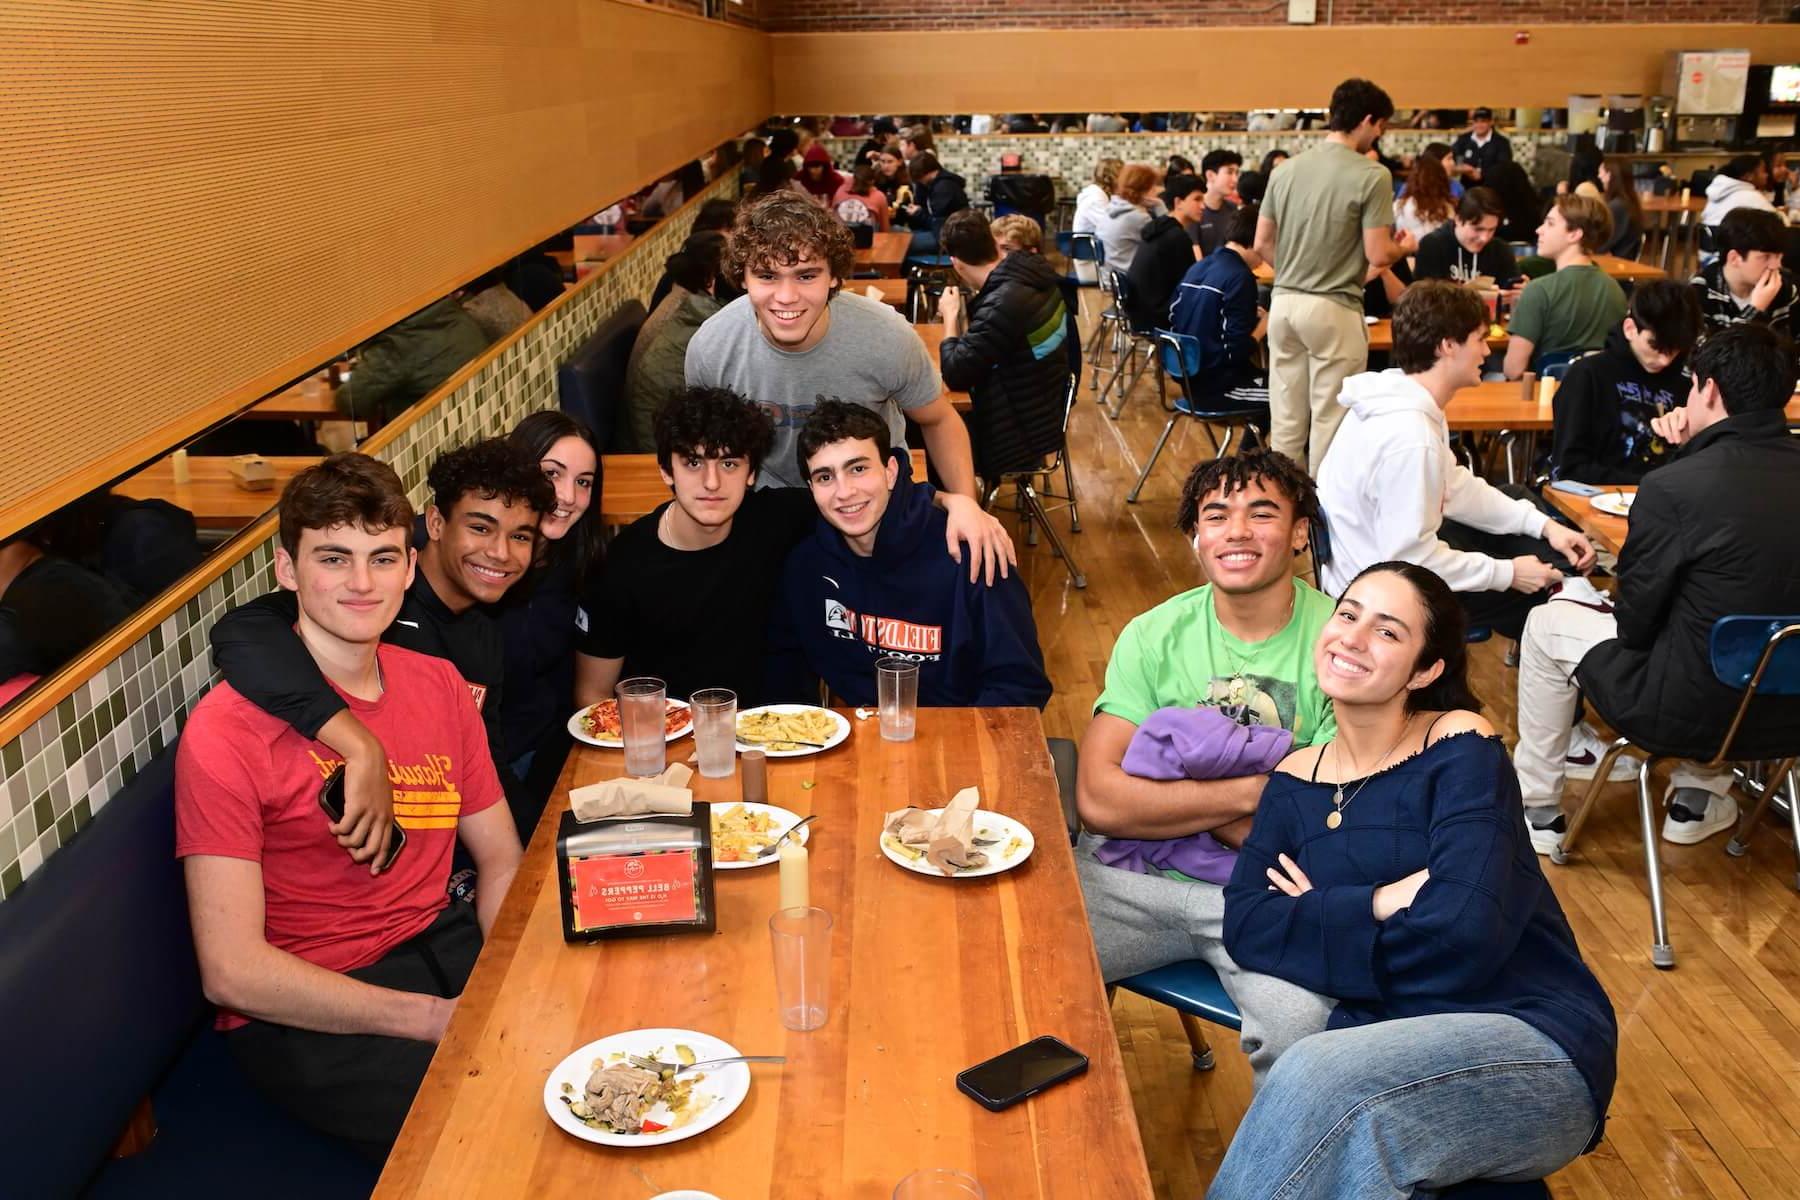 Ethical Culture Fieldston School students posing for photo during lunch at Fieldston Upper